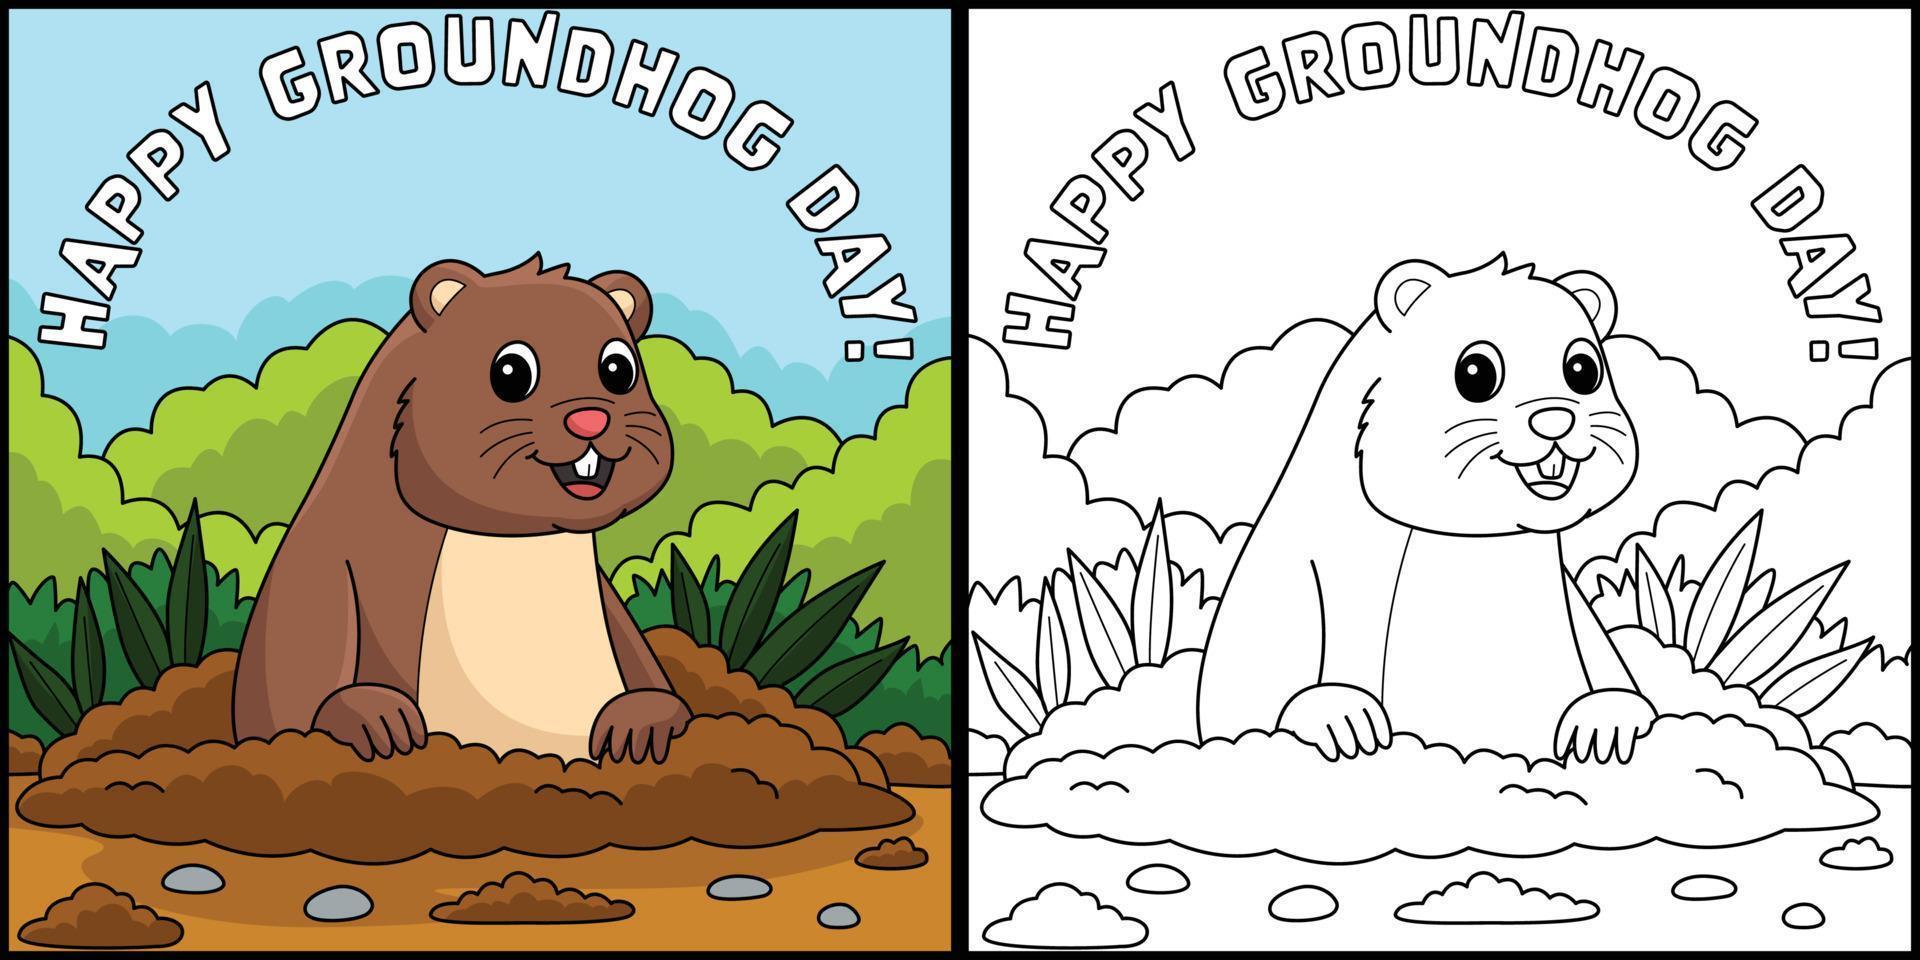 Happy Groundhog Day Coloring Page Illustration vector